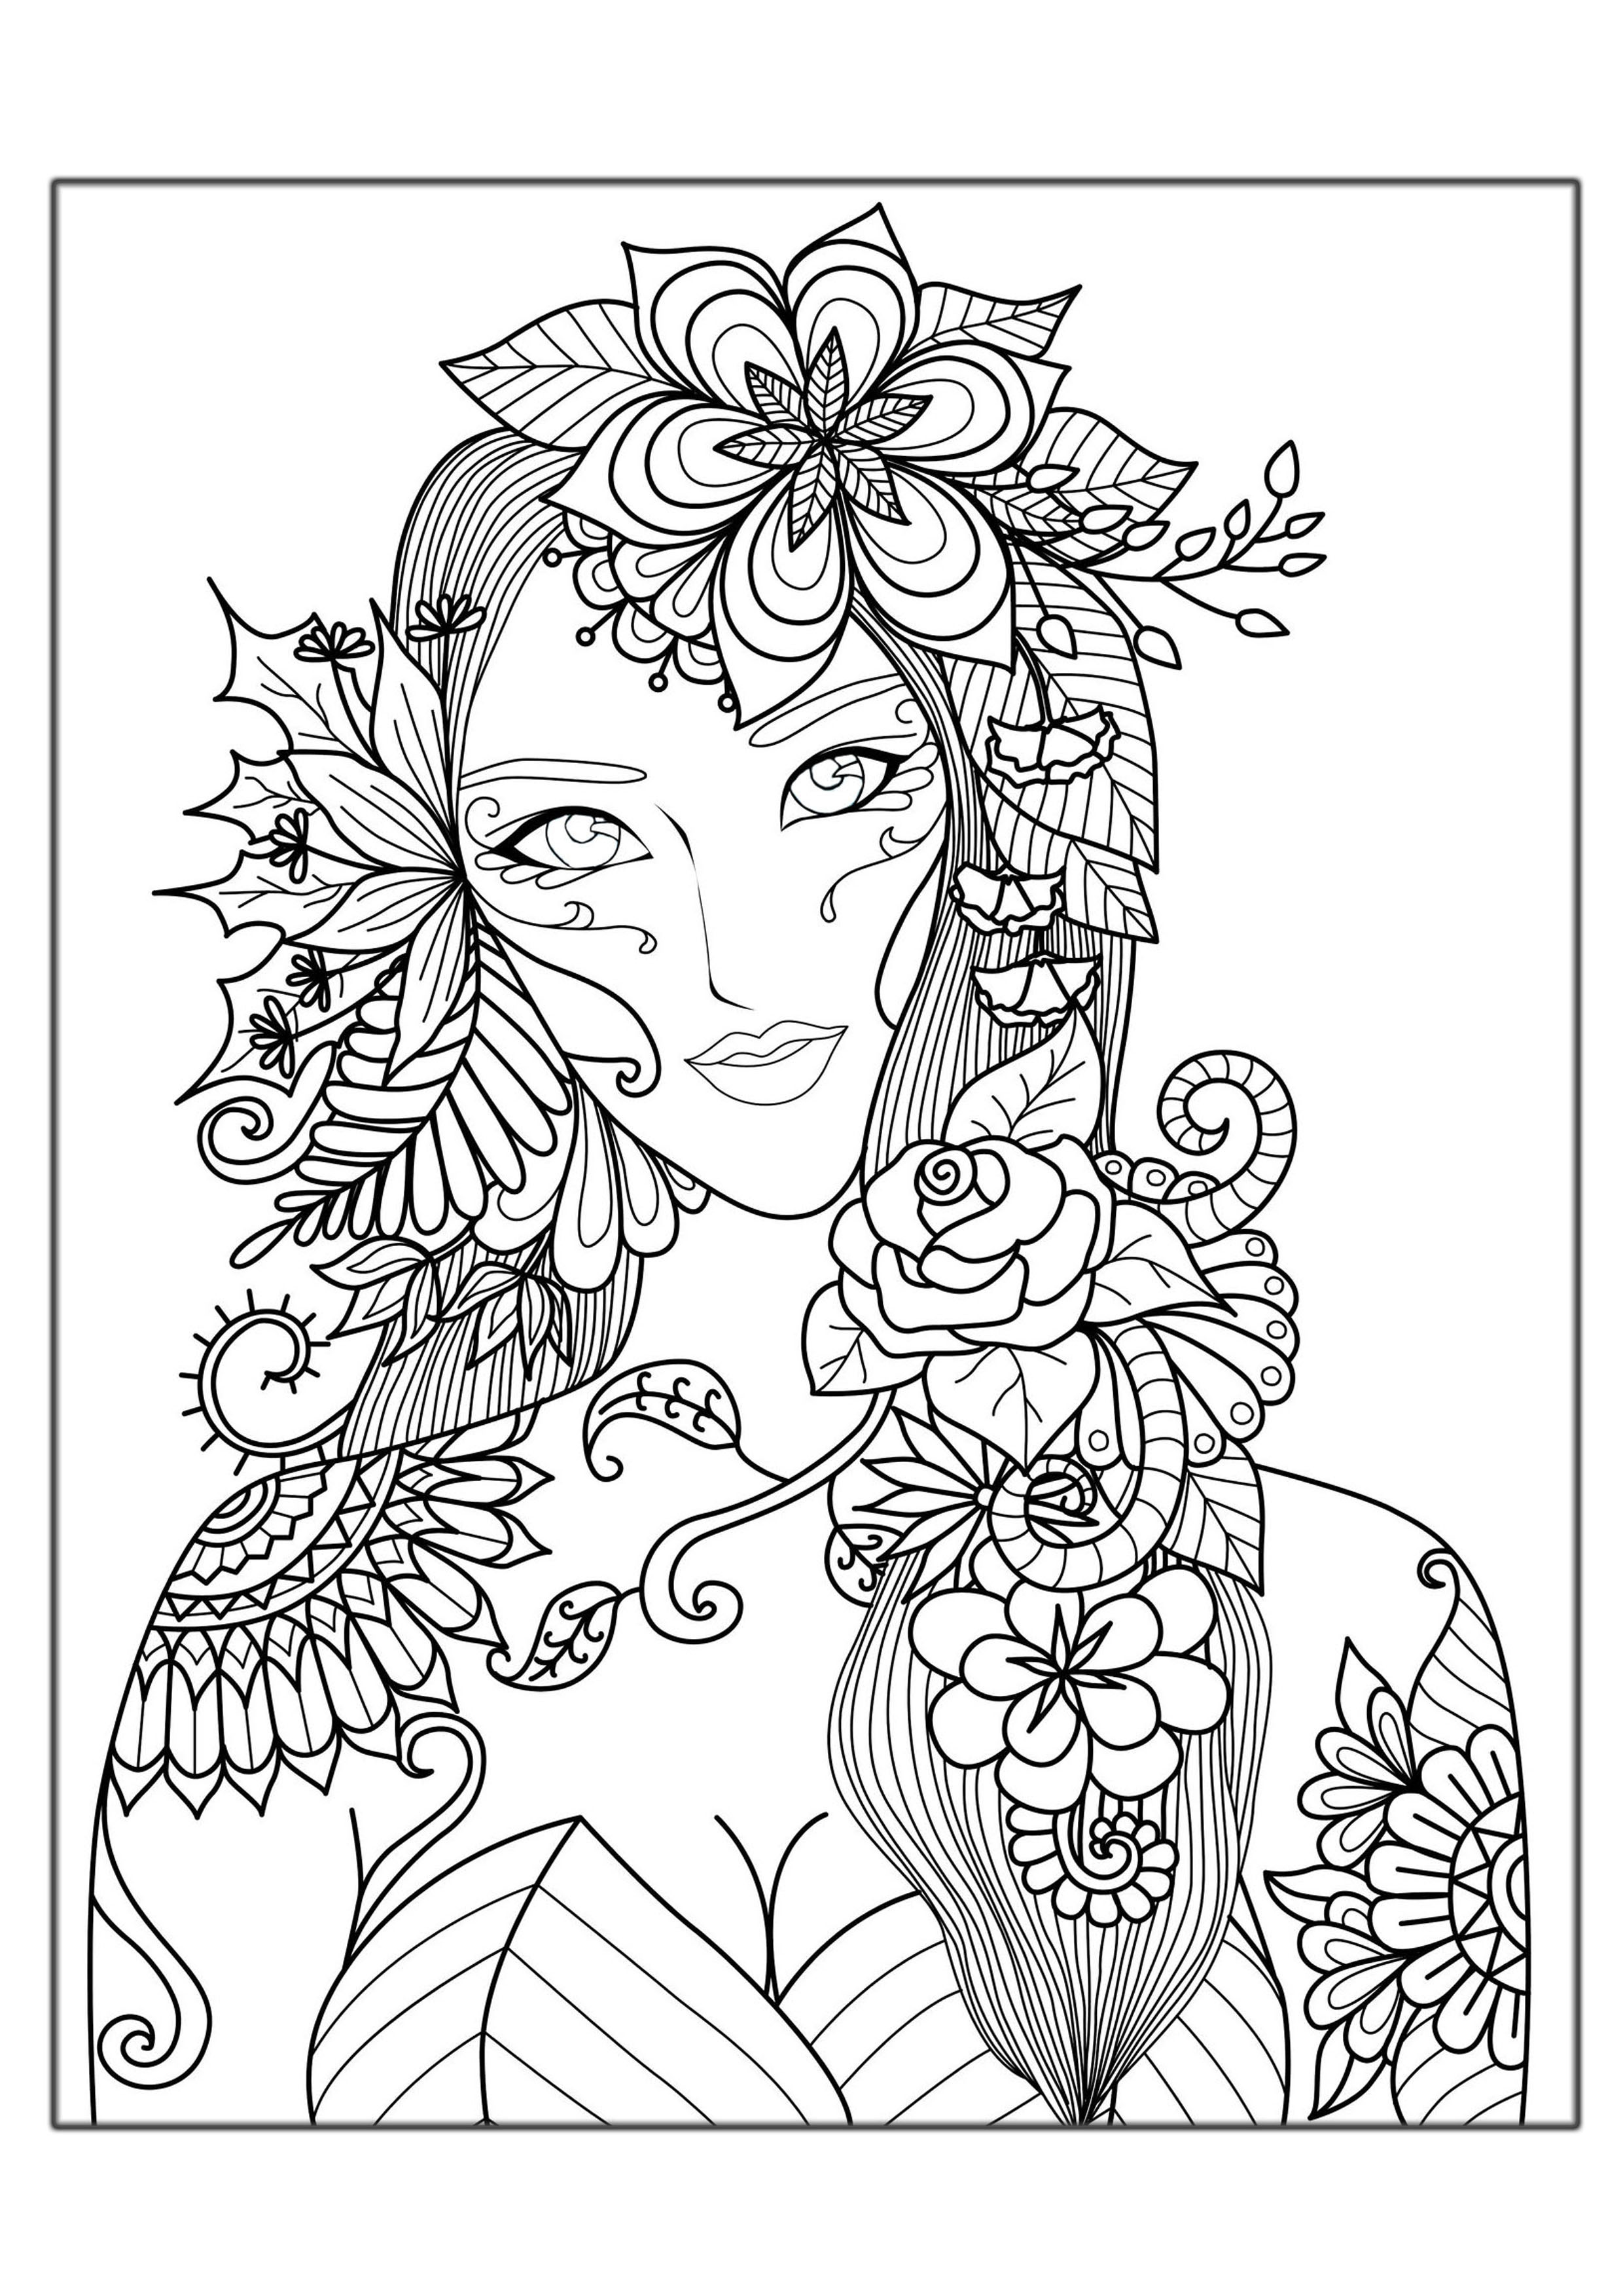 Coloring Pages For Men
 Hard Coloring Pages for Adults Best Coloring Pages For Kids